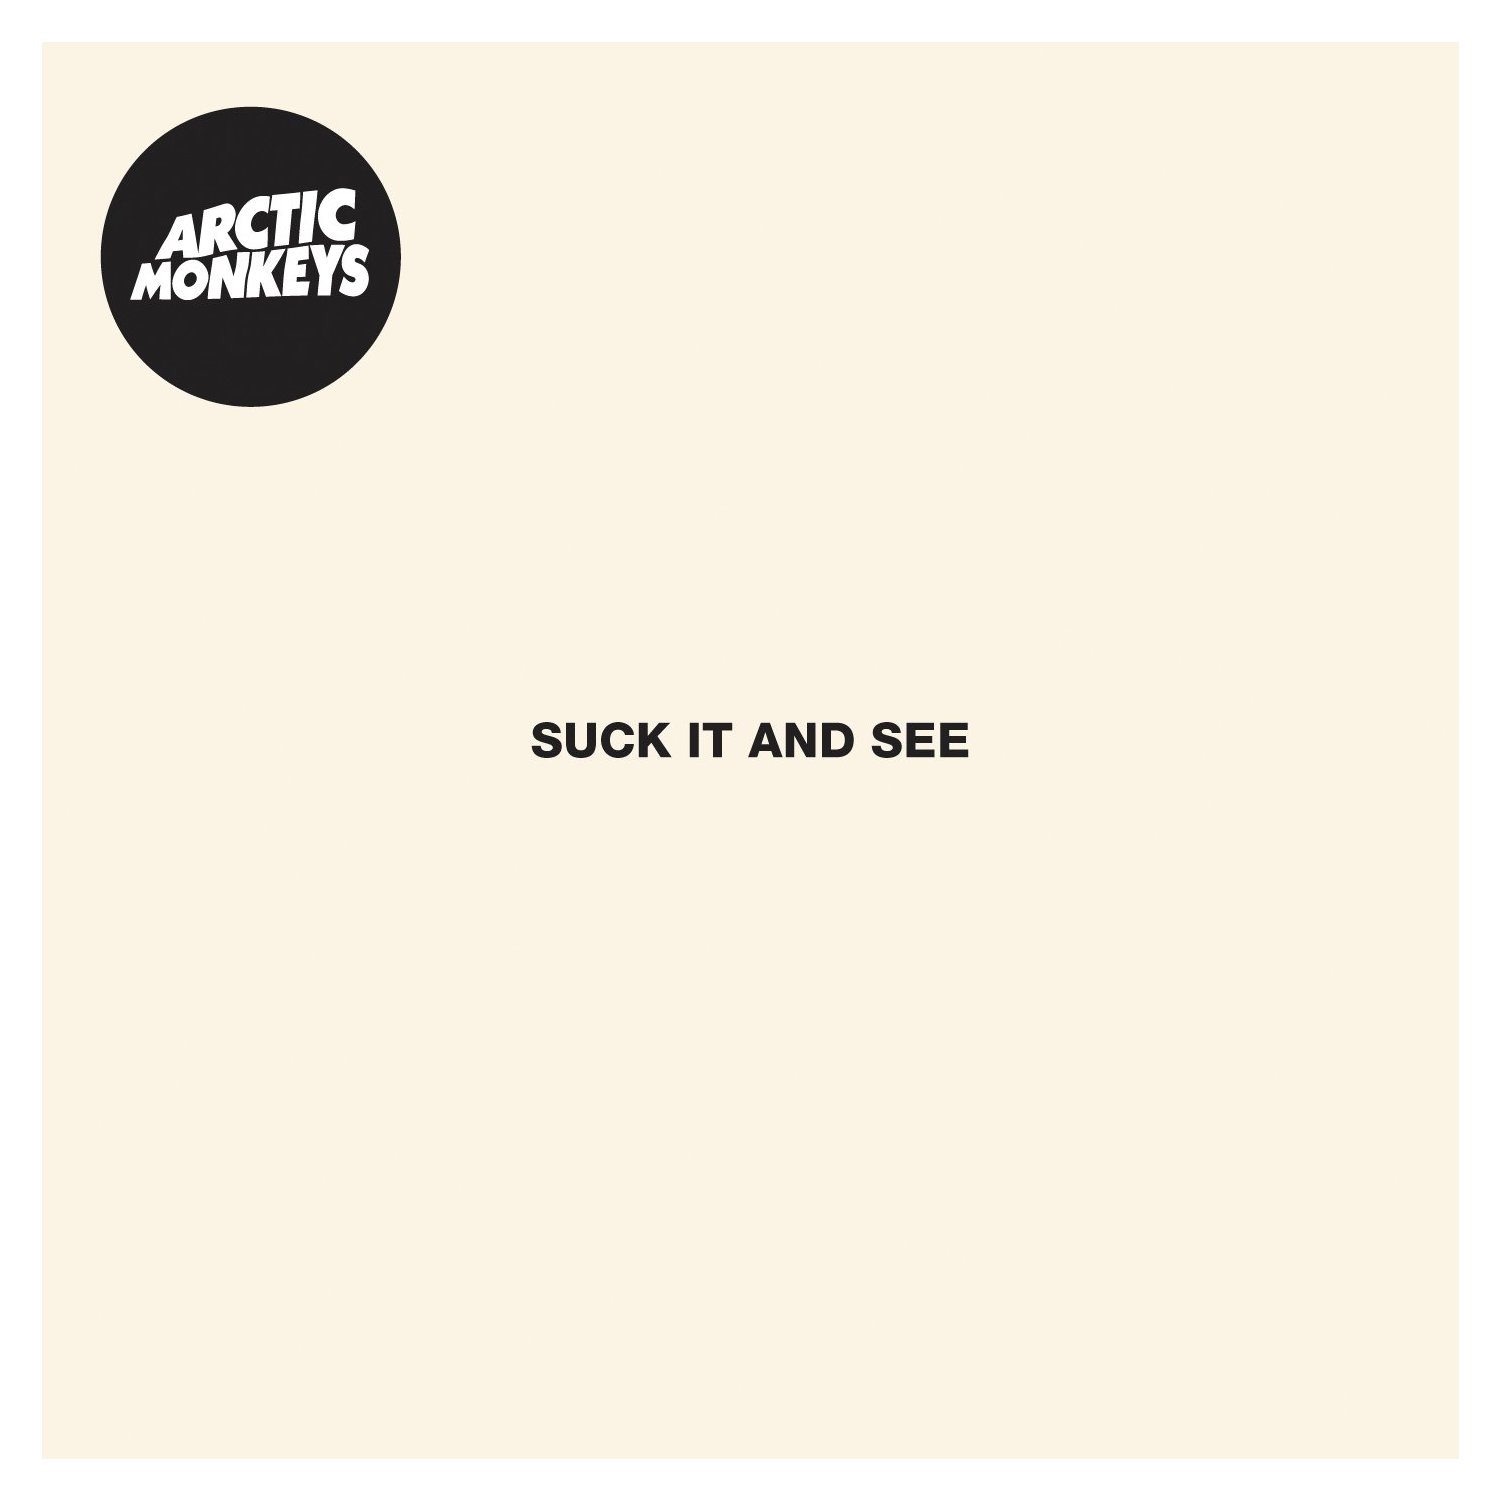 SUCK IT AND SEE -- ARCTIC MONKEYS